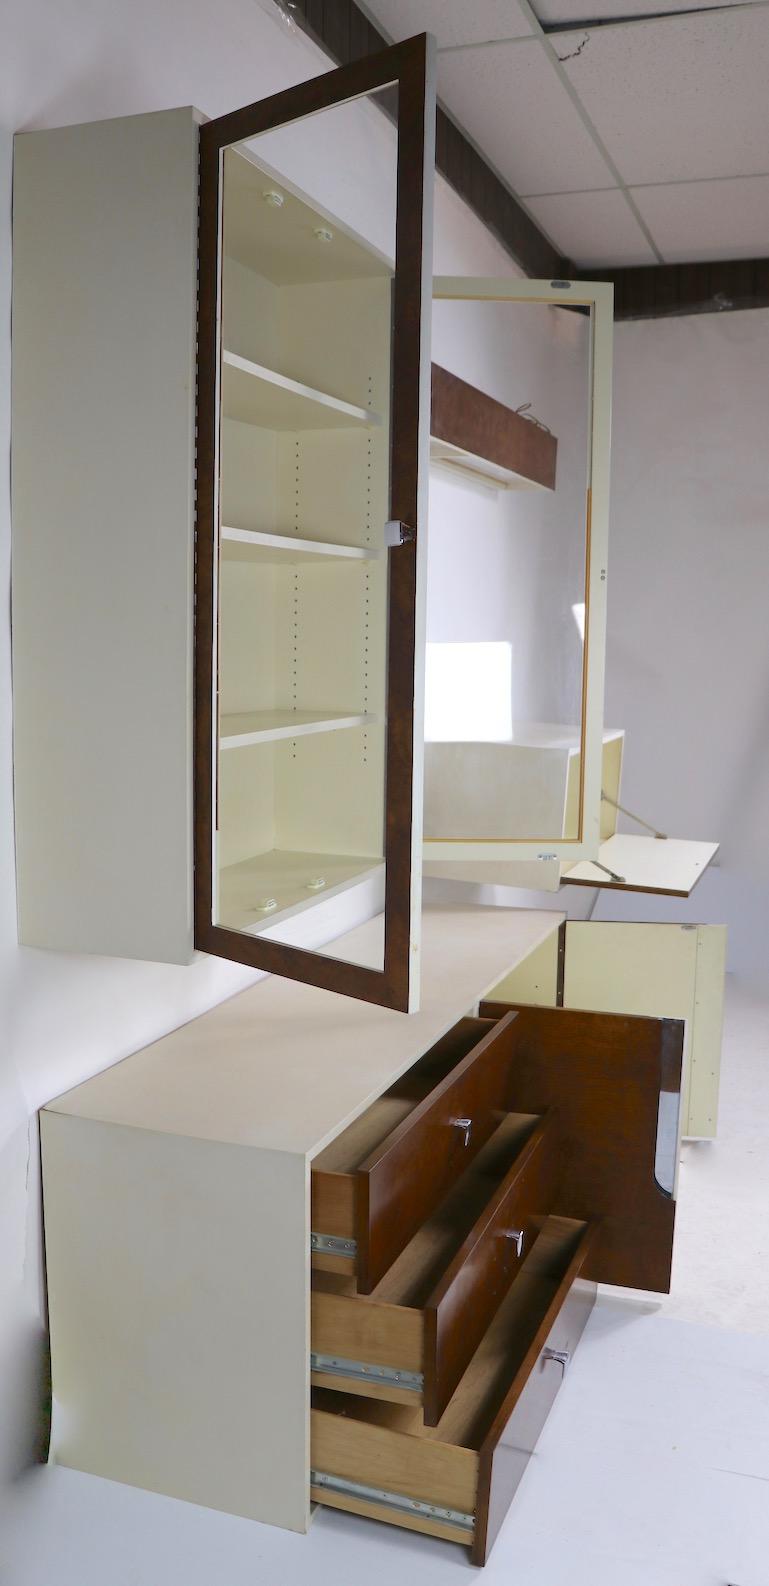 Modular Wall Unit in the style of Milo Baughman 10